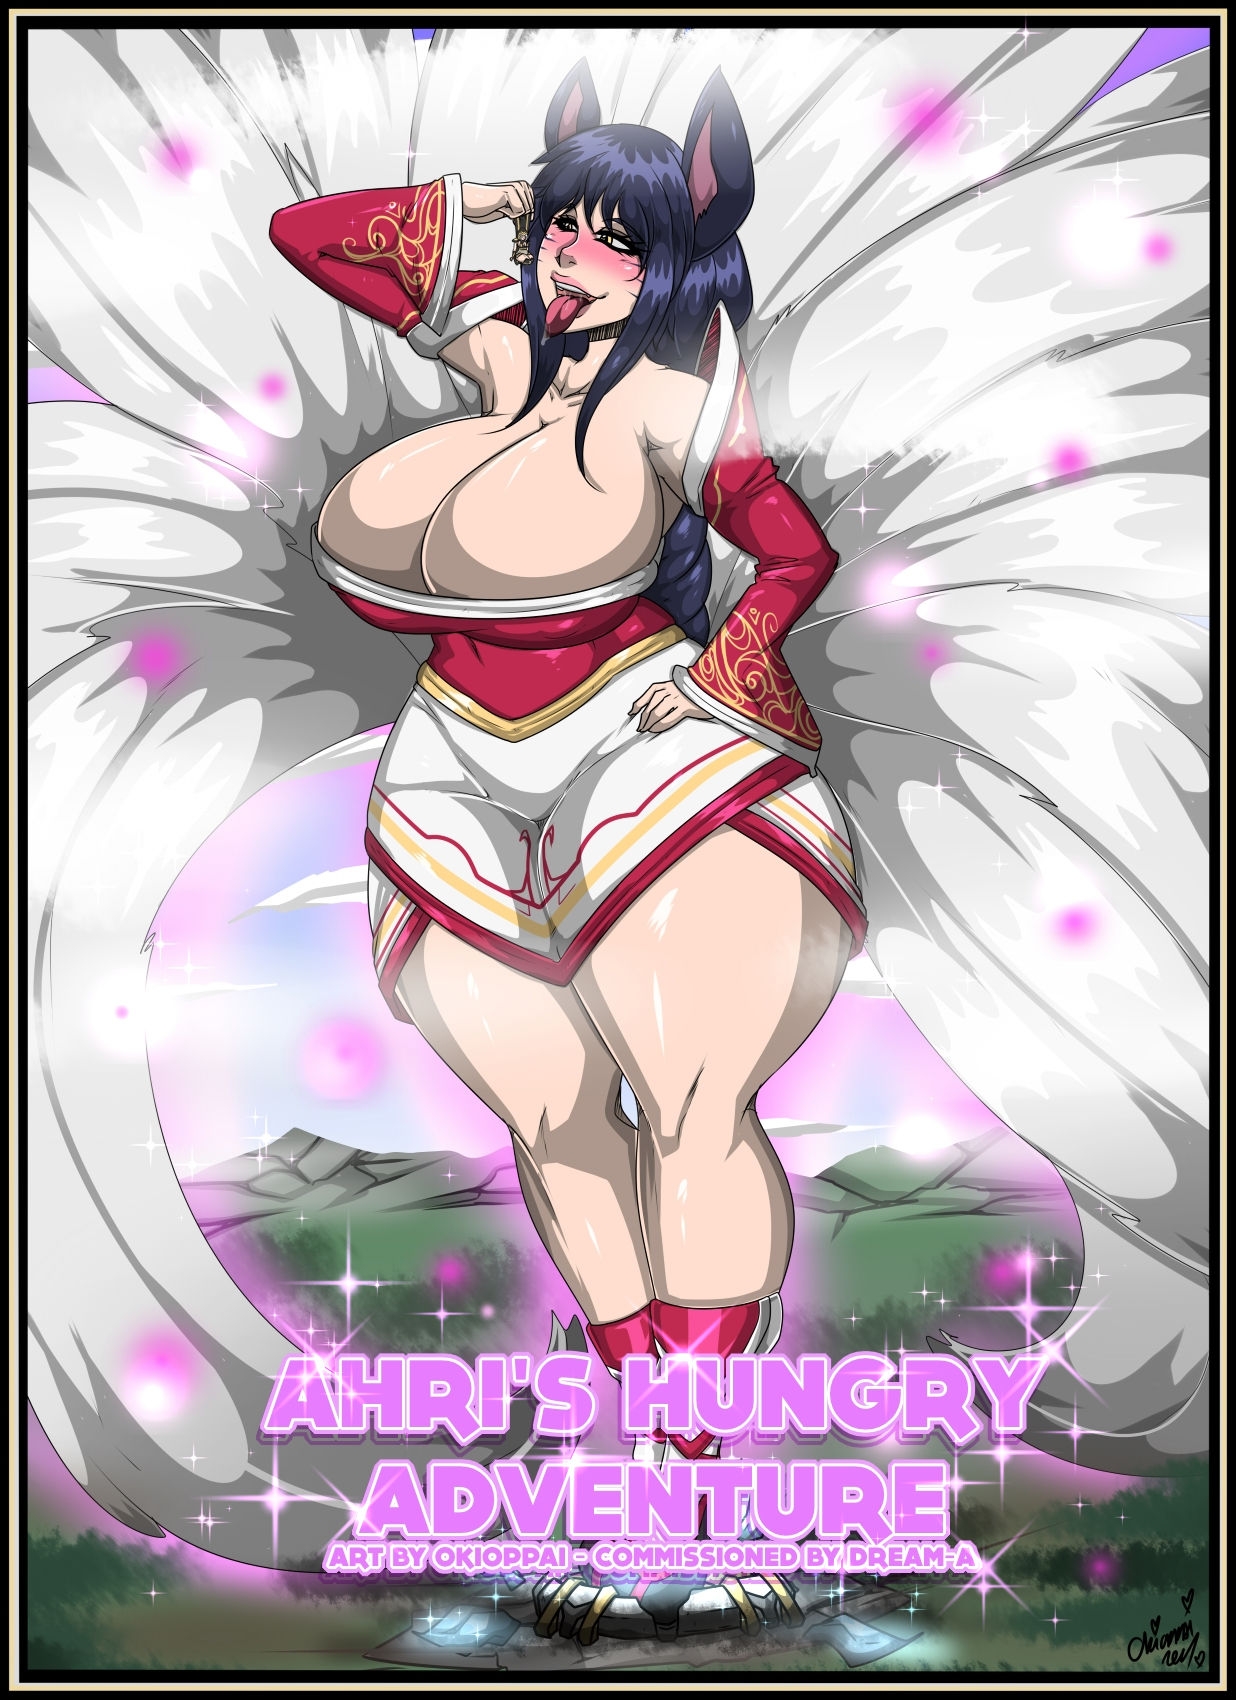 [OkiOppai] Ahri's Hungry Adventure (League of Legends) [Ongoing] 0